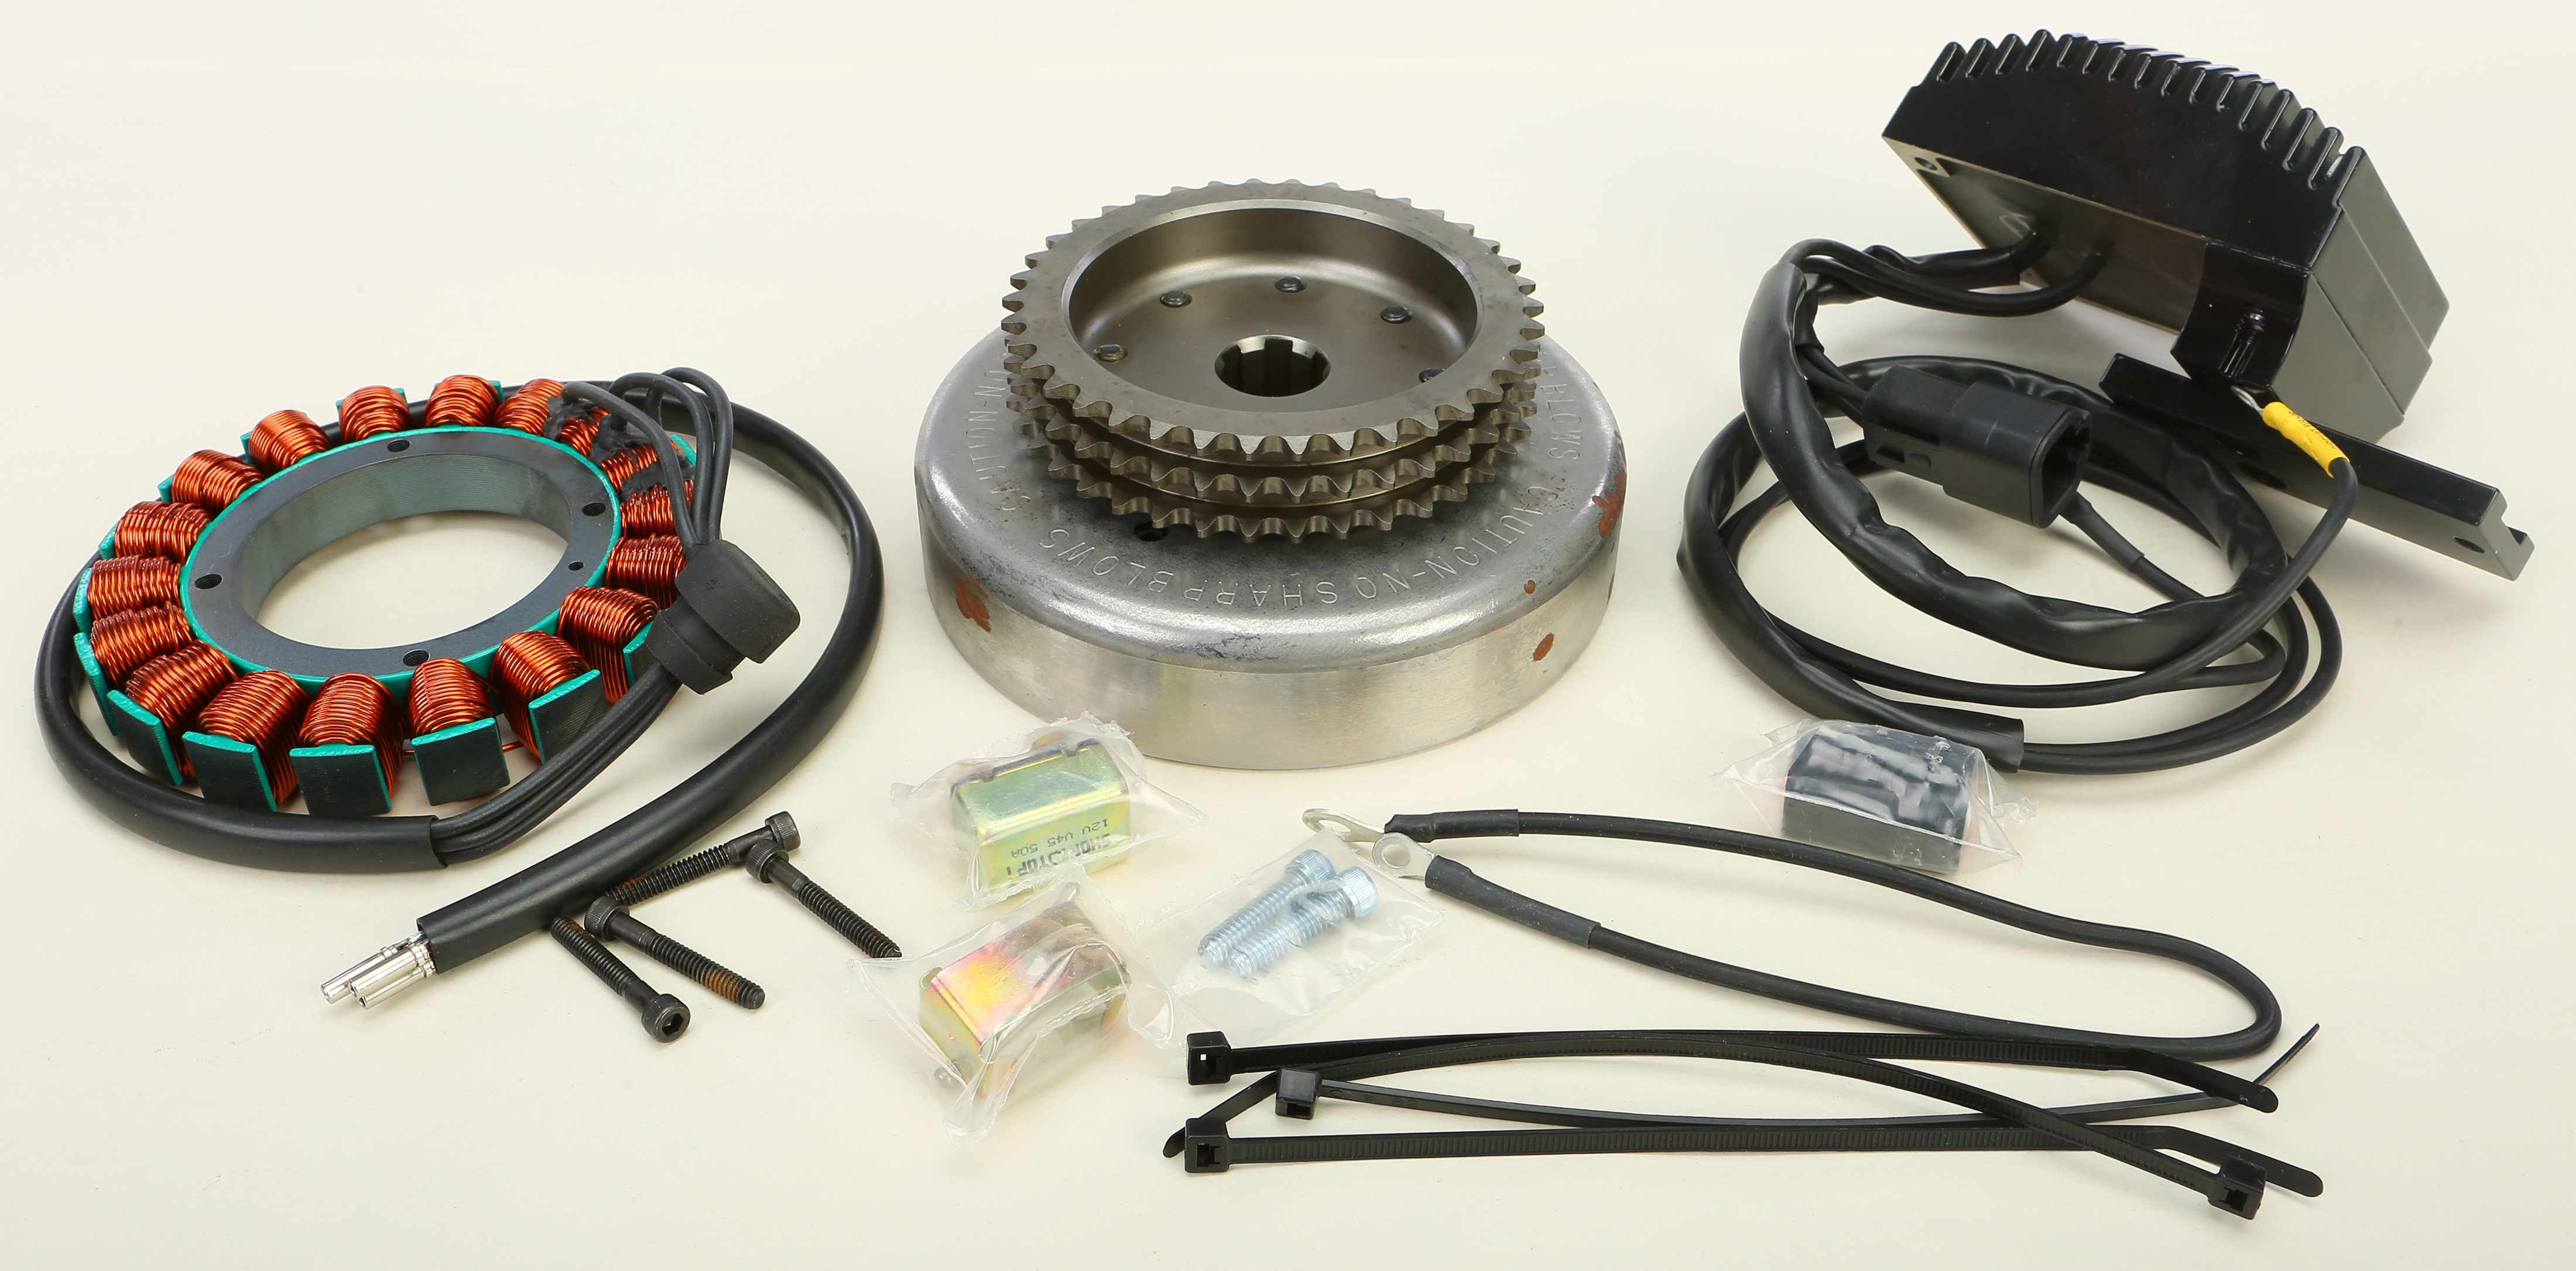 Alternator Kit - For 04-06 Harley XL1200 Sportster - Click Image to Close